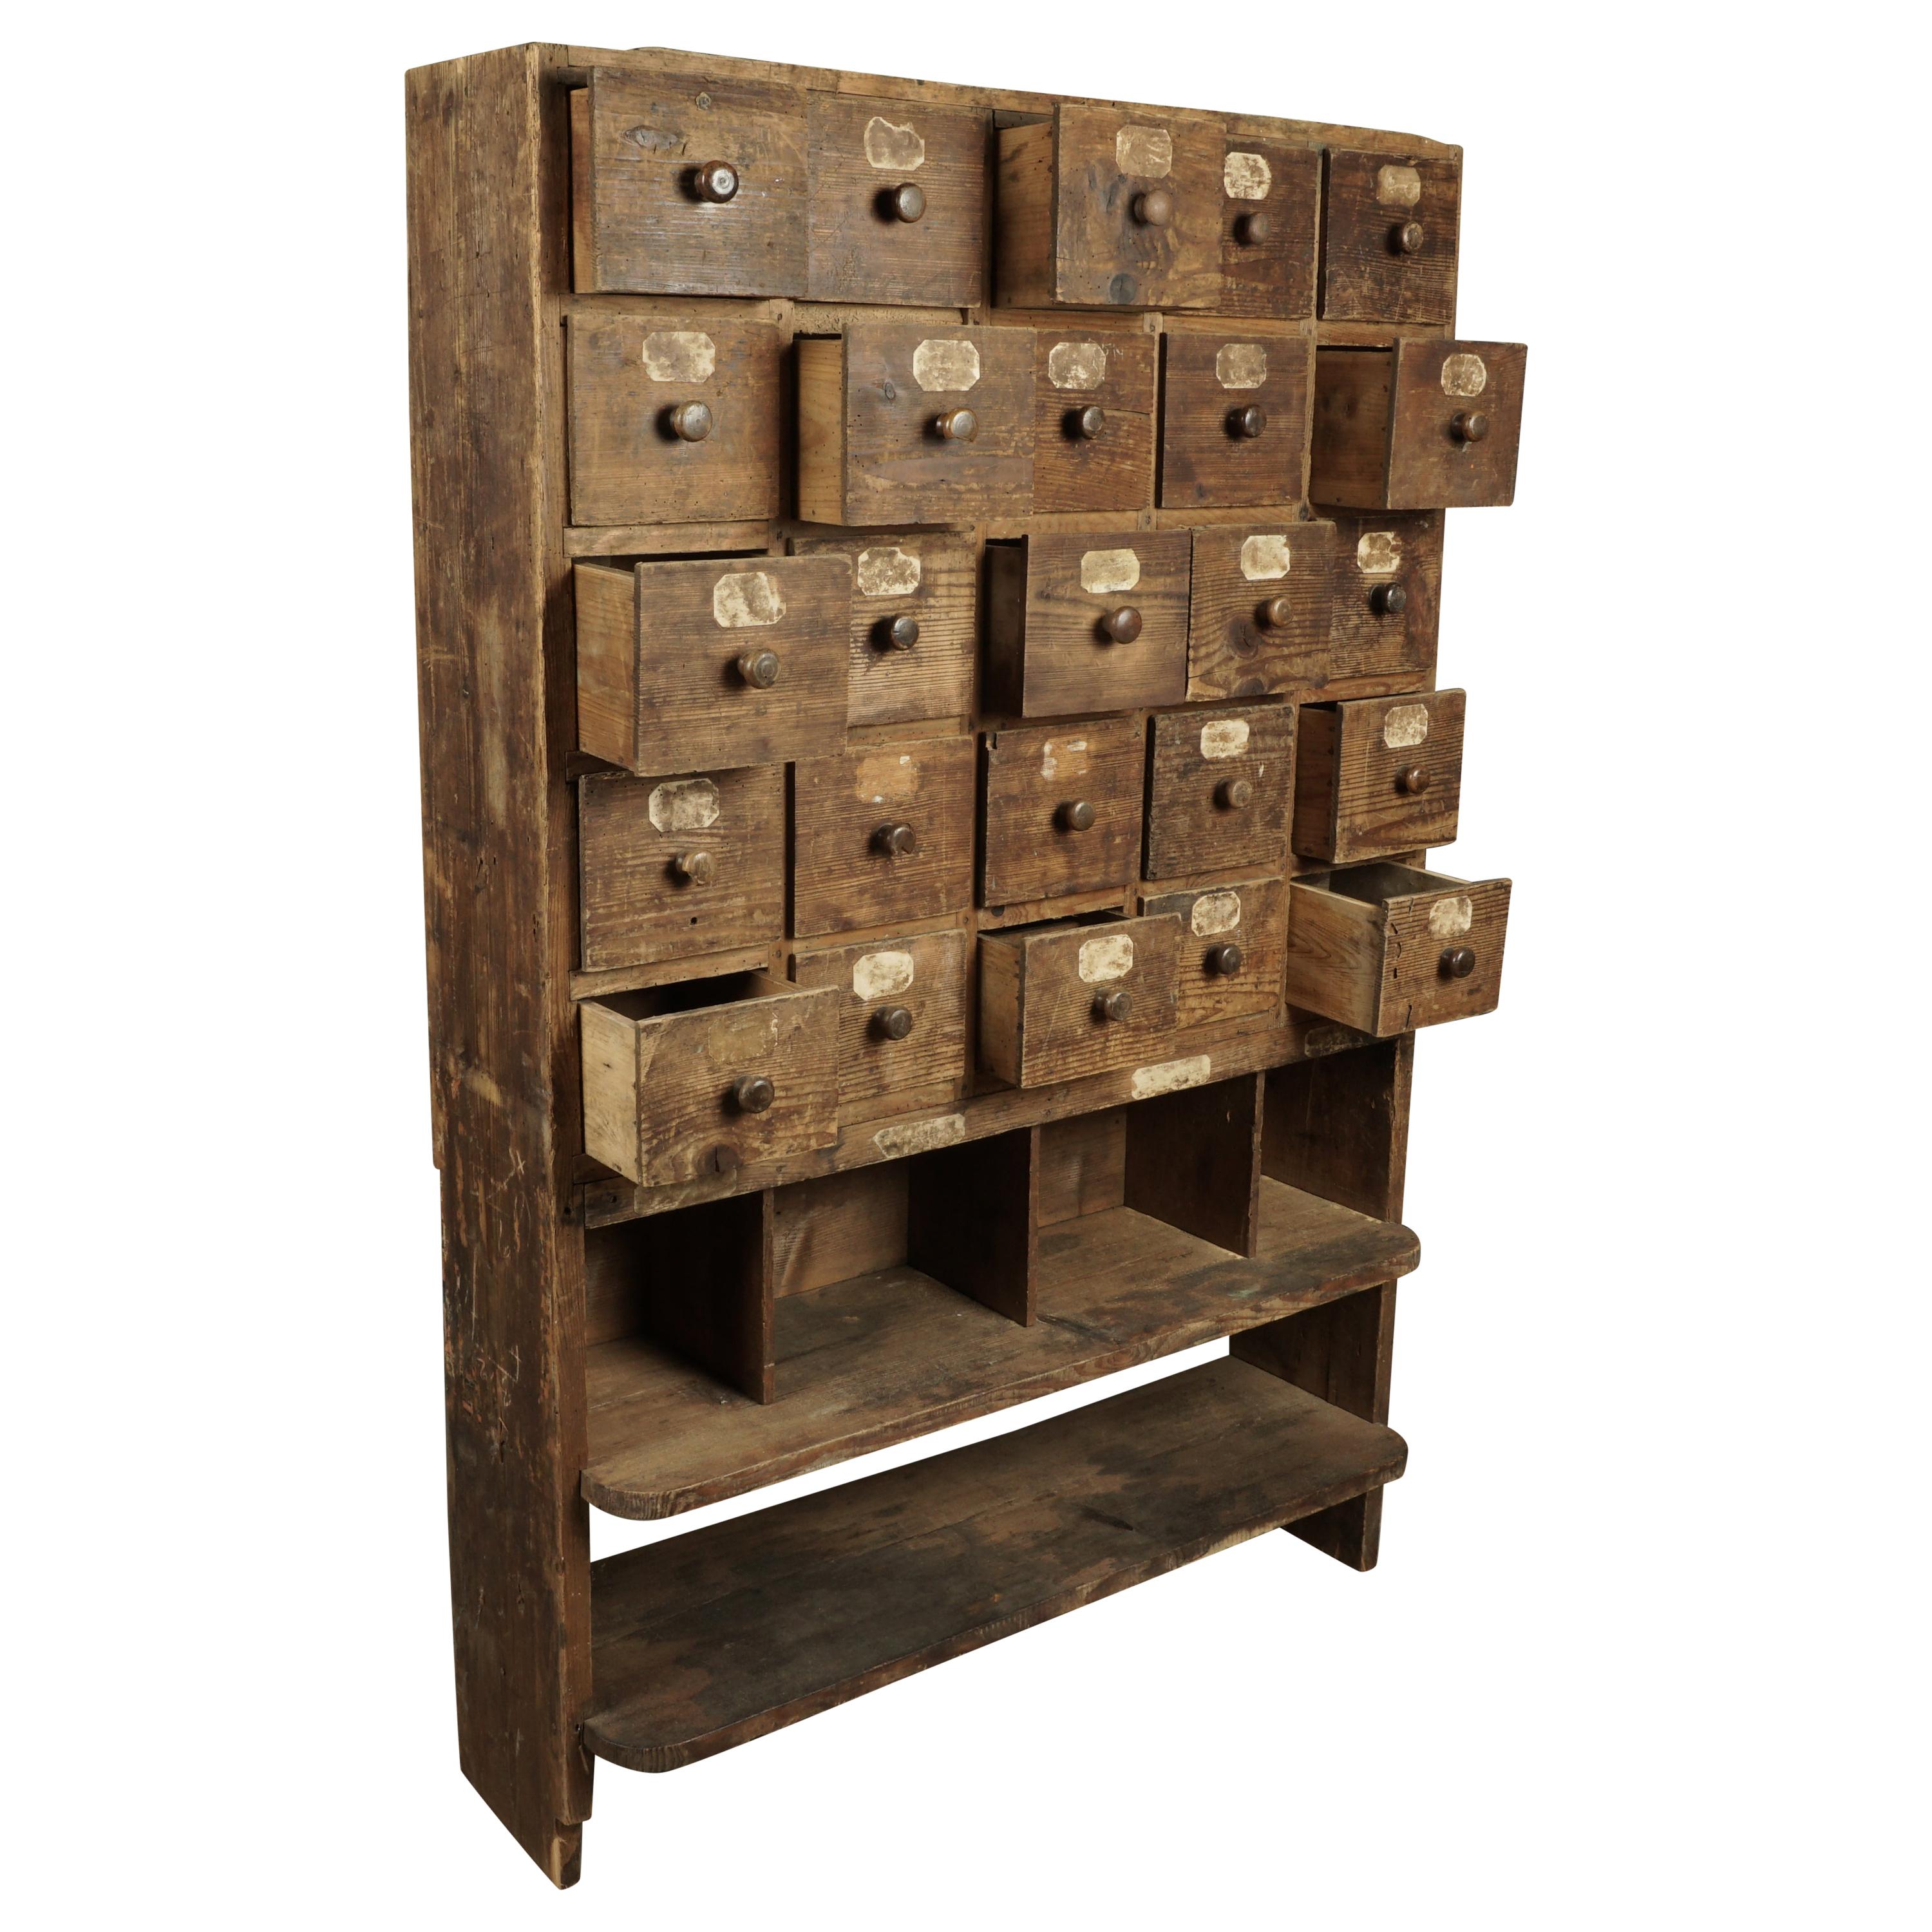 Early Pine Multi Drawer Cabinet from France, circa 1940